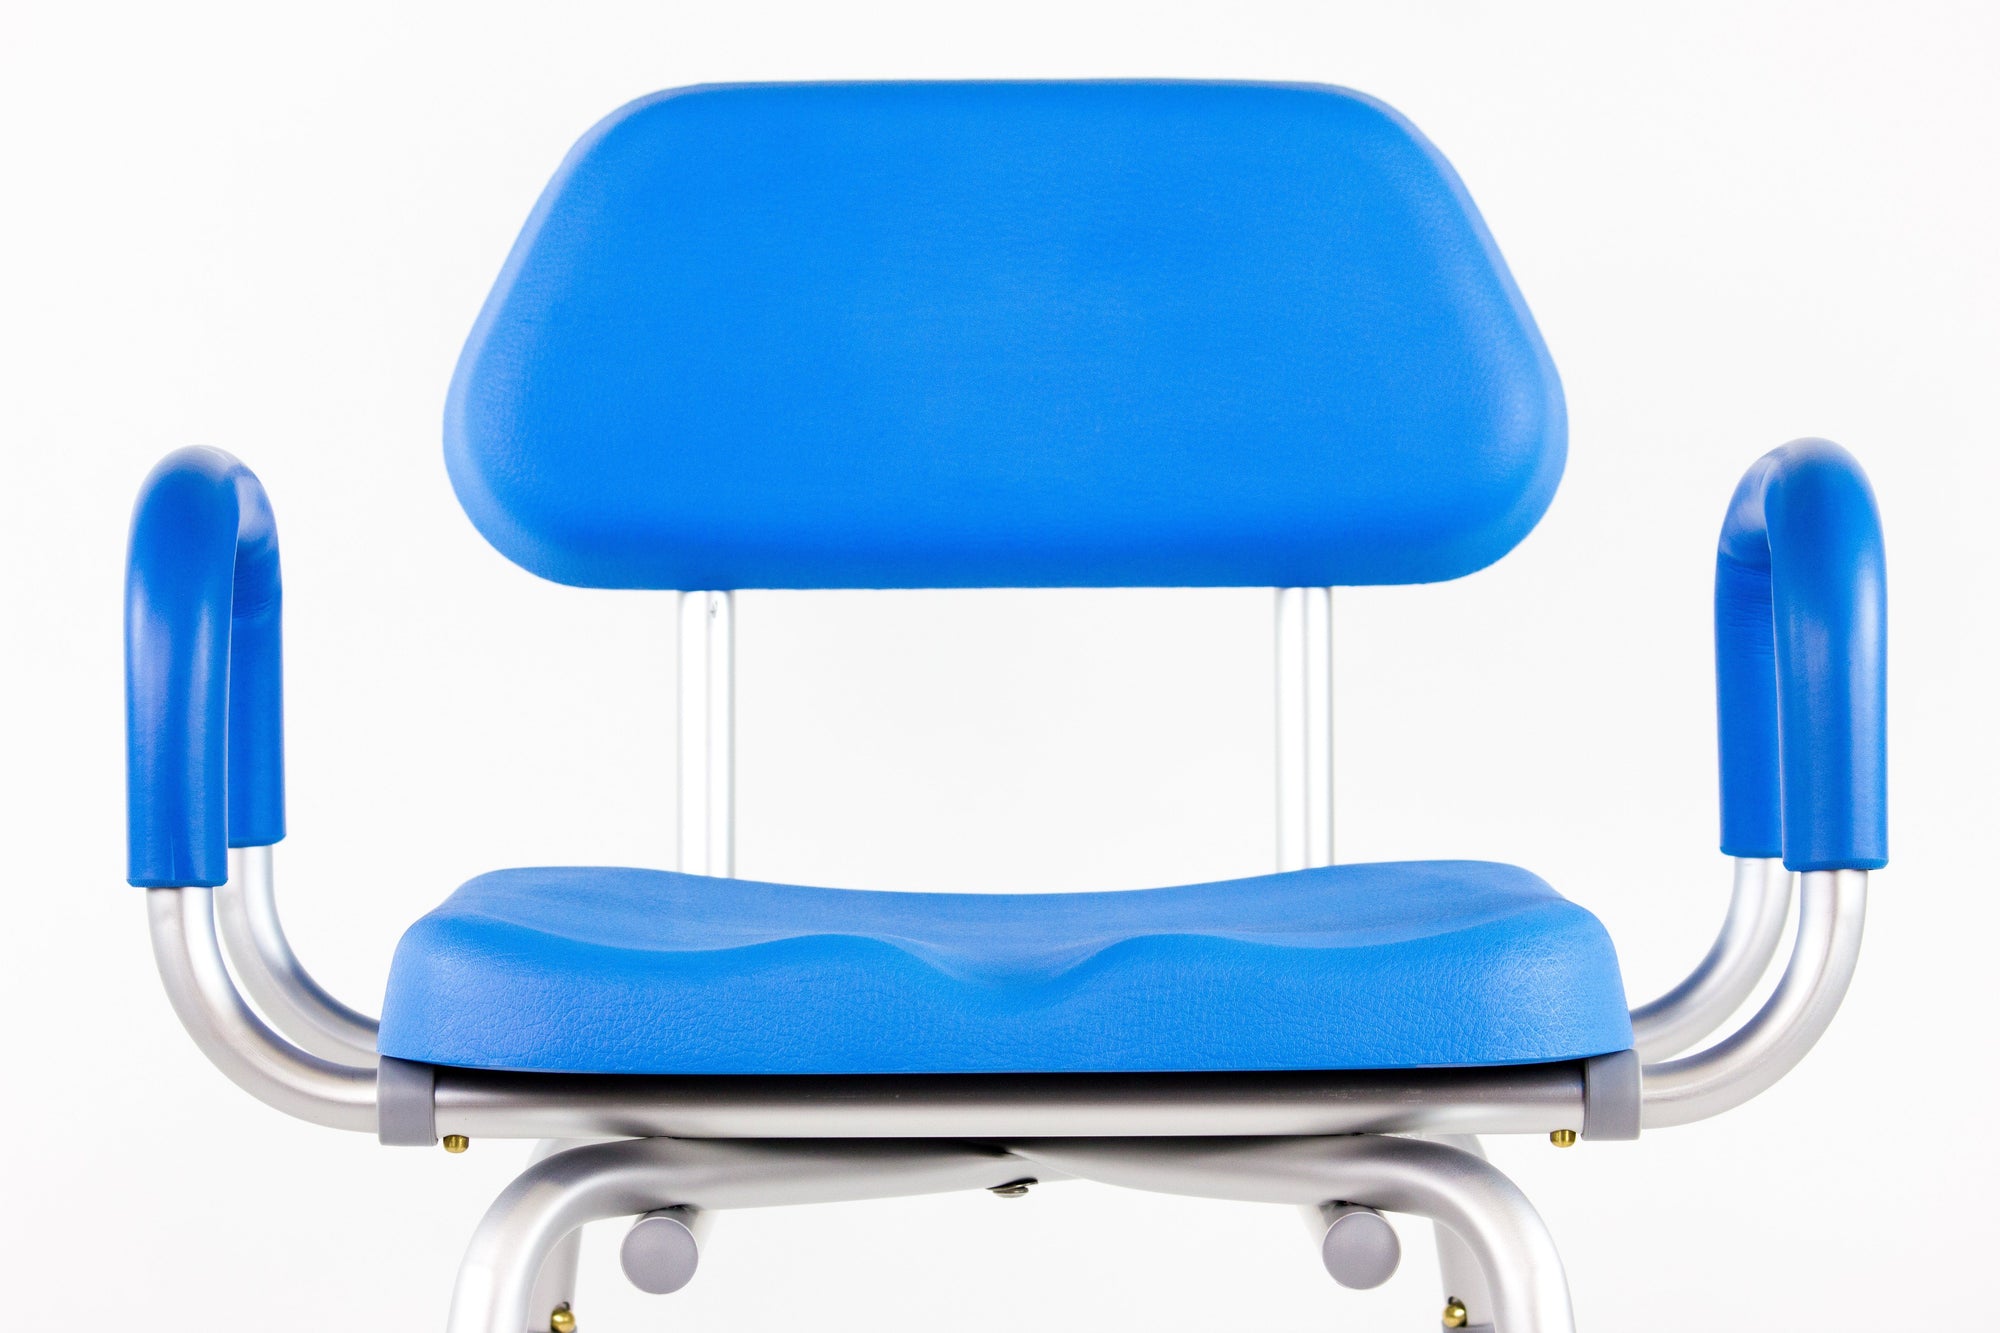 Buy Hip Chairs, Hip Replacement Chairs